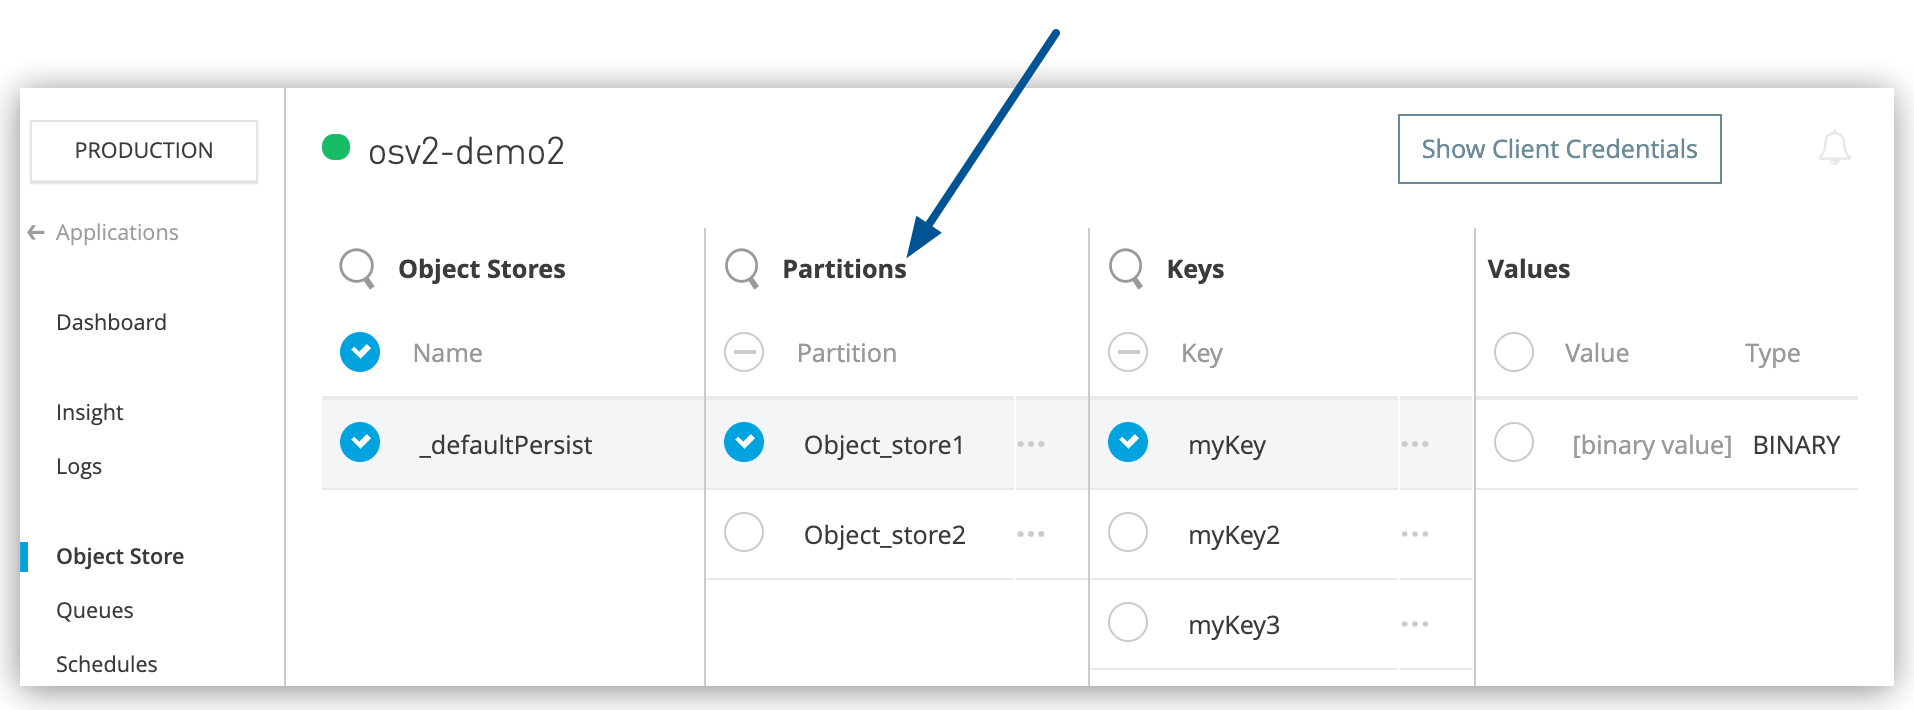 Partitions in the Object Store page